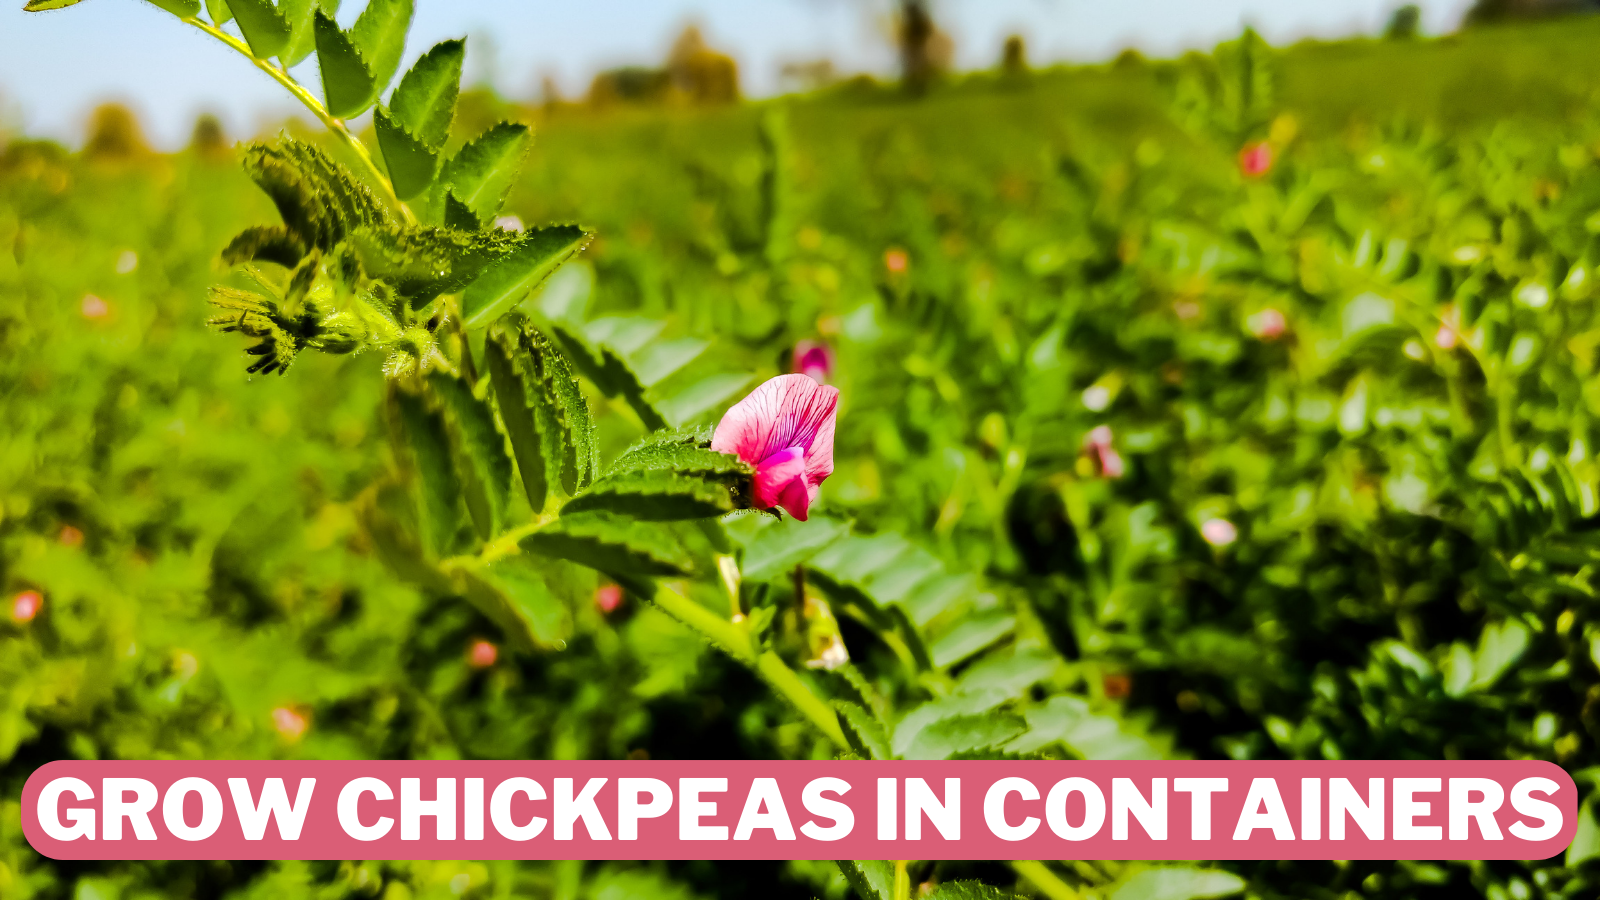 Best Steps To Grow Chickpeas In Containers